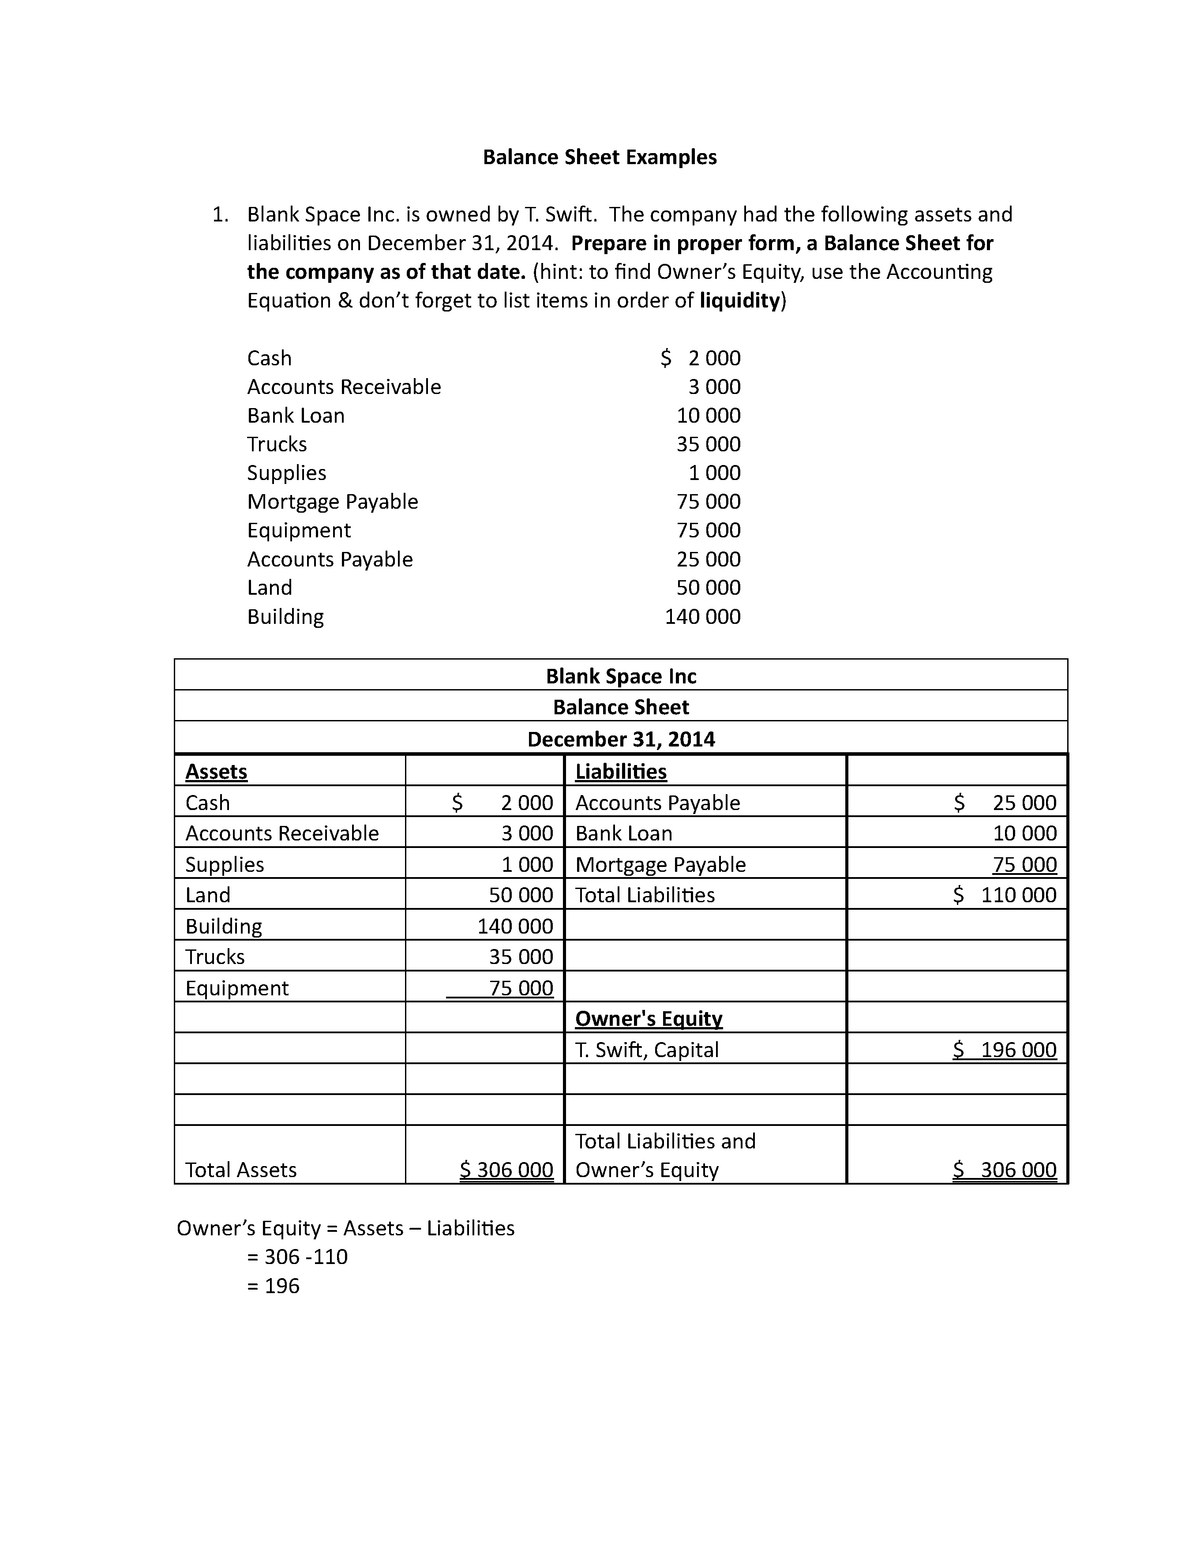 20 - Balance Sheet Answers - Balance Sheet Examples Blank Space With Assets And Liabilities Worksheet